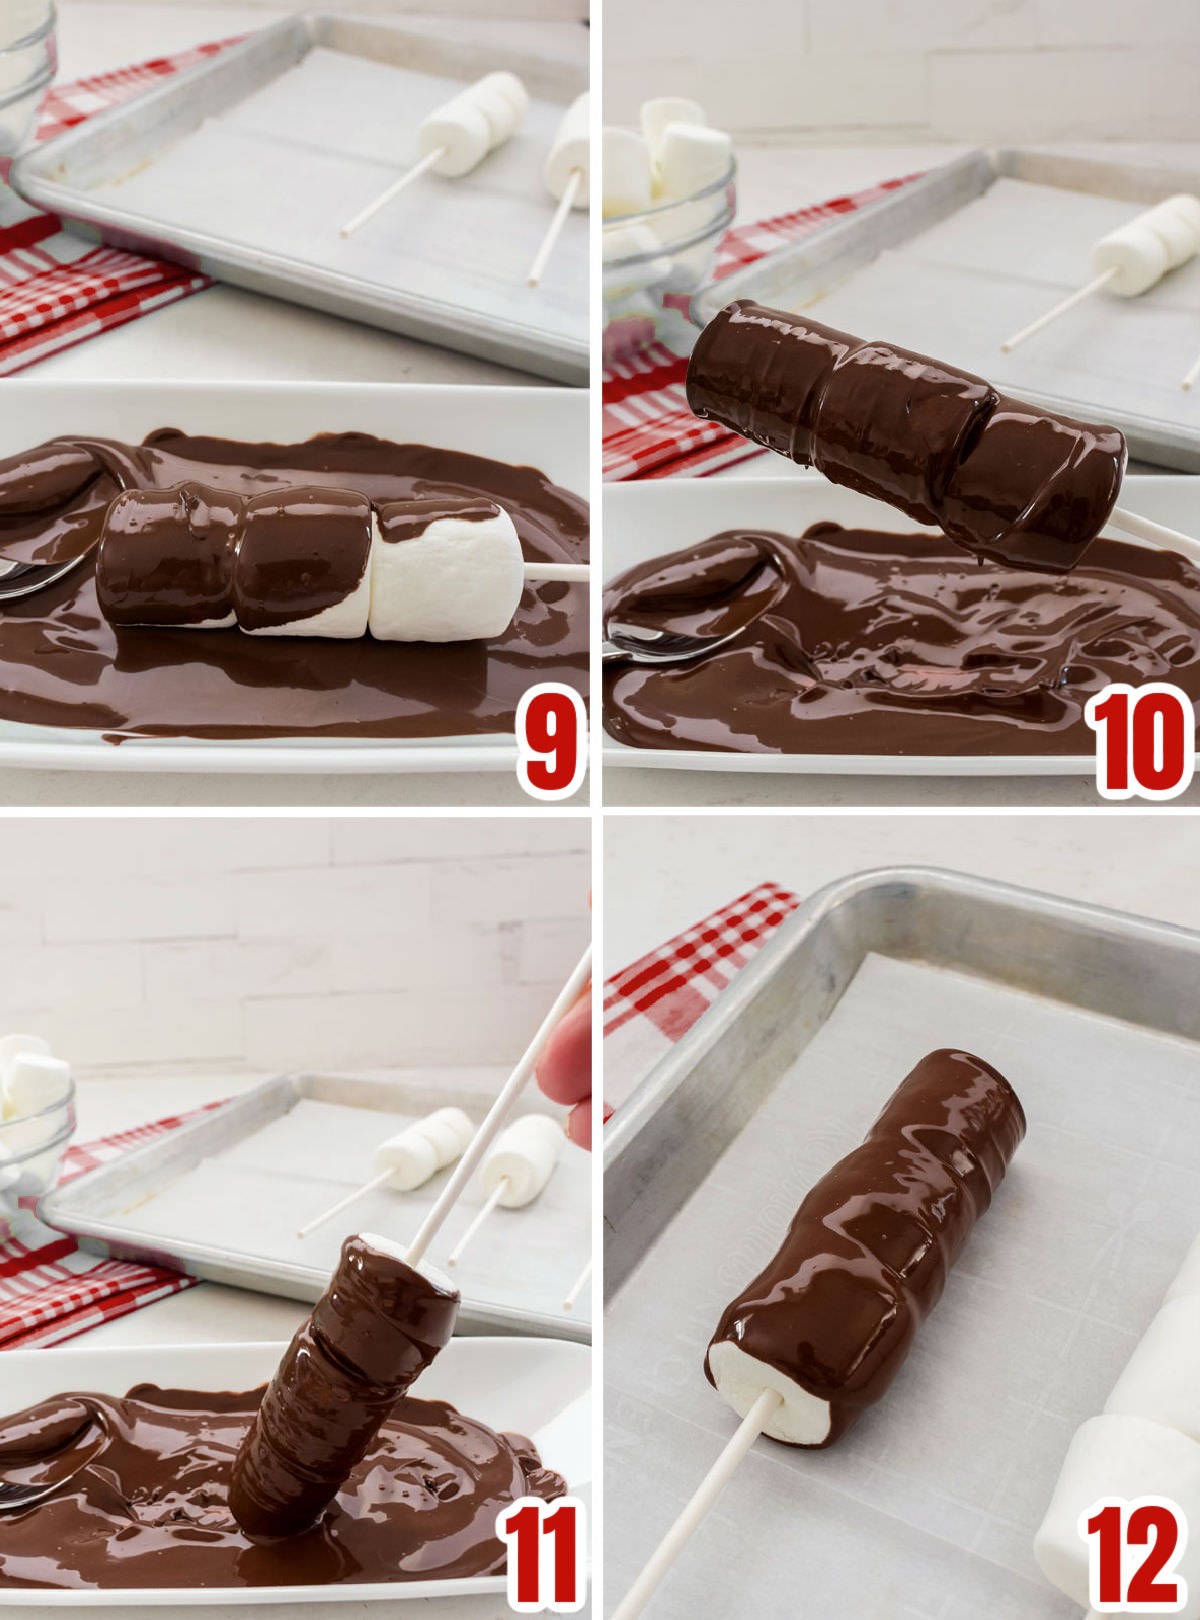 Collage image showing the steps for covering the marshmallow pop with chocolate.